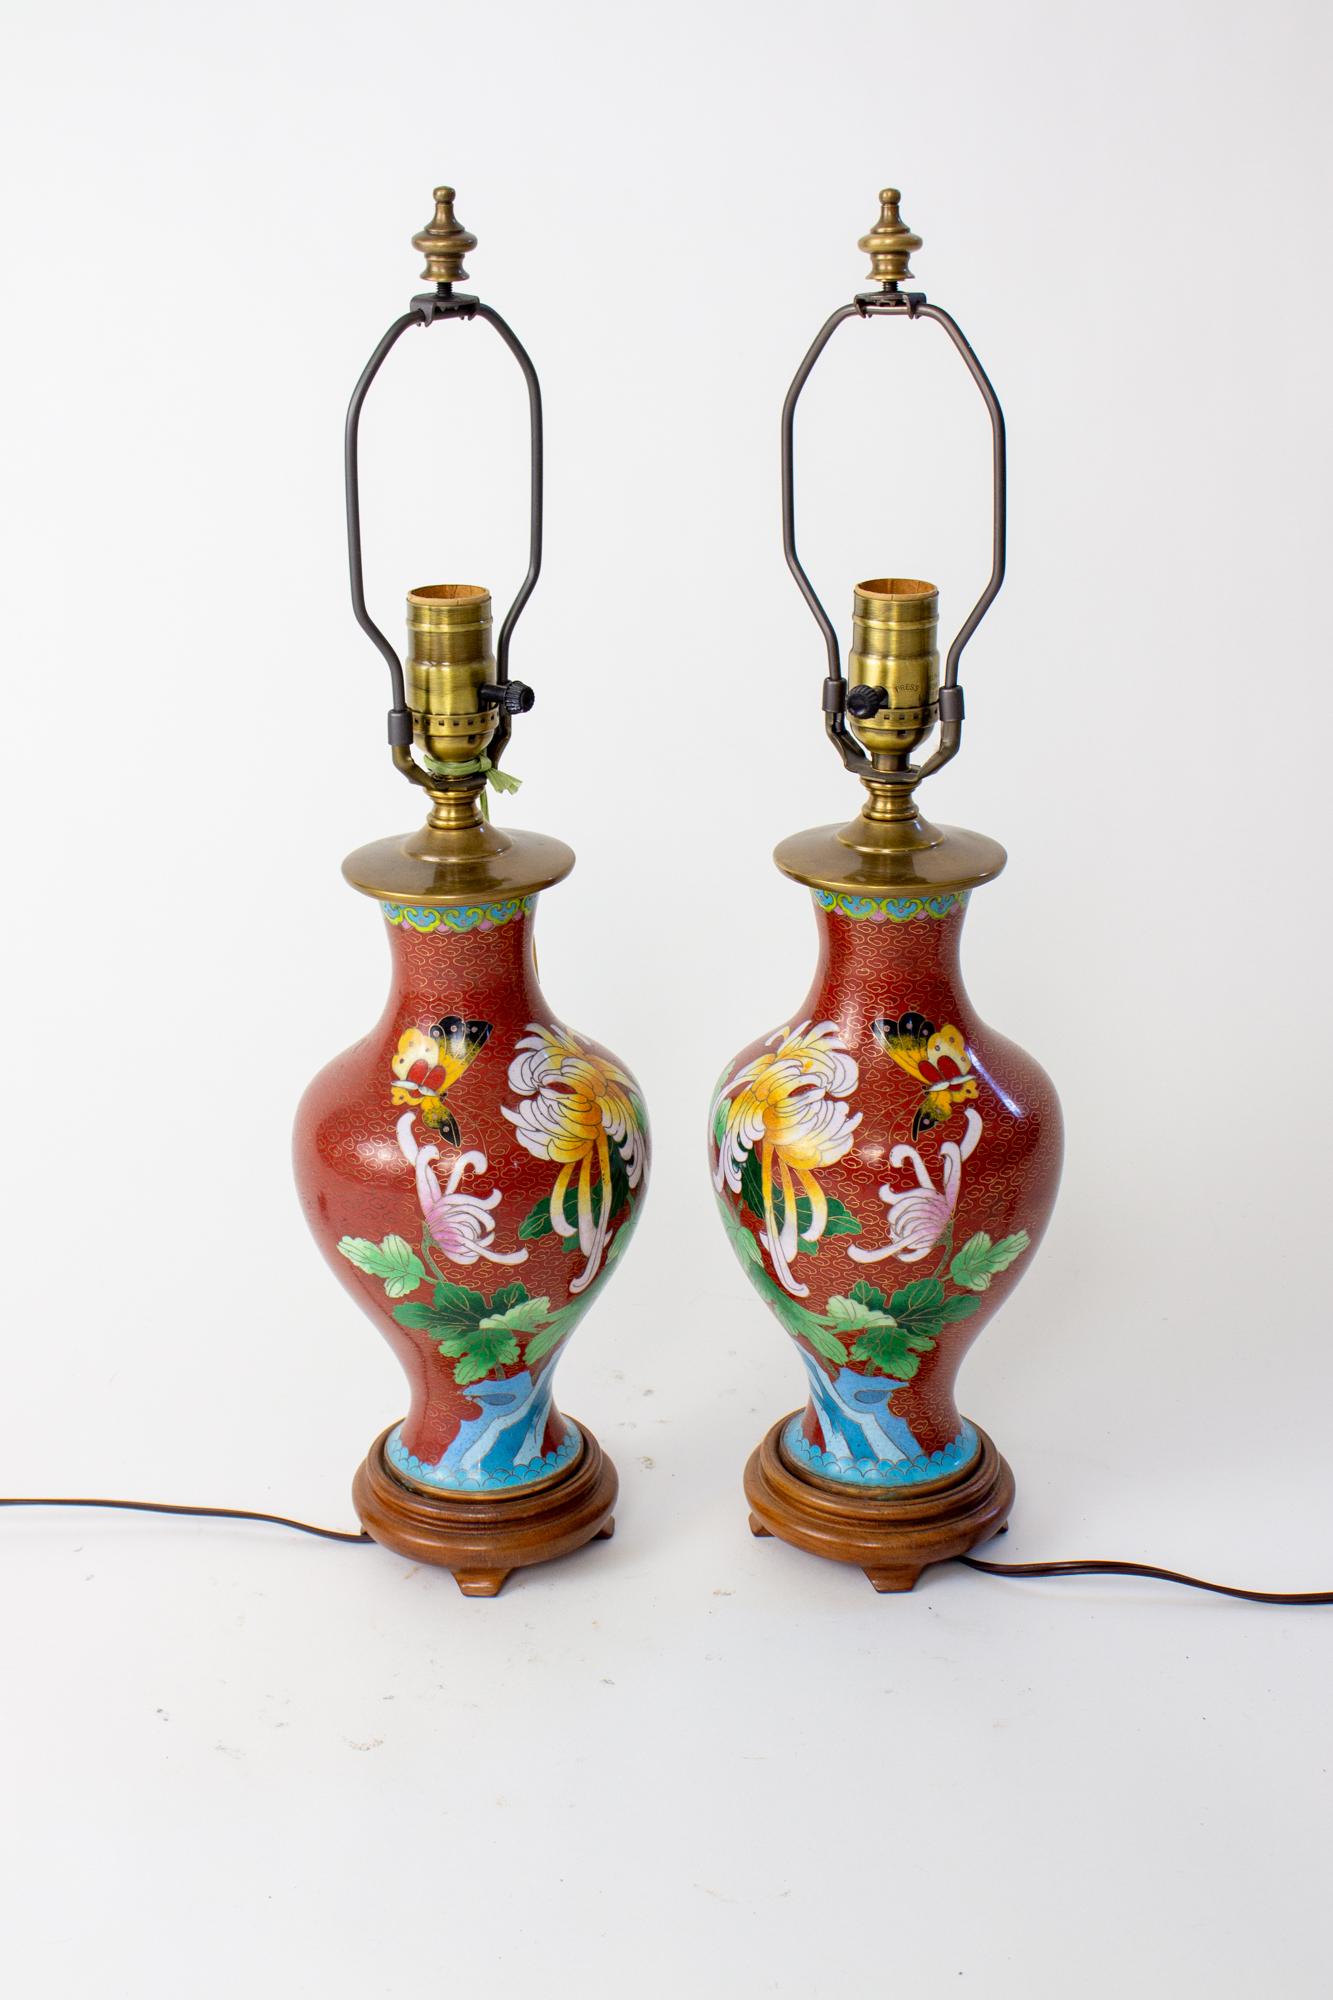 Chinese Export Mid 20th Century Chrysanthemum Cloisonne Table Lamps - a Pair For Sale